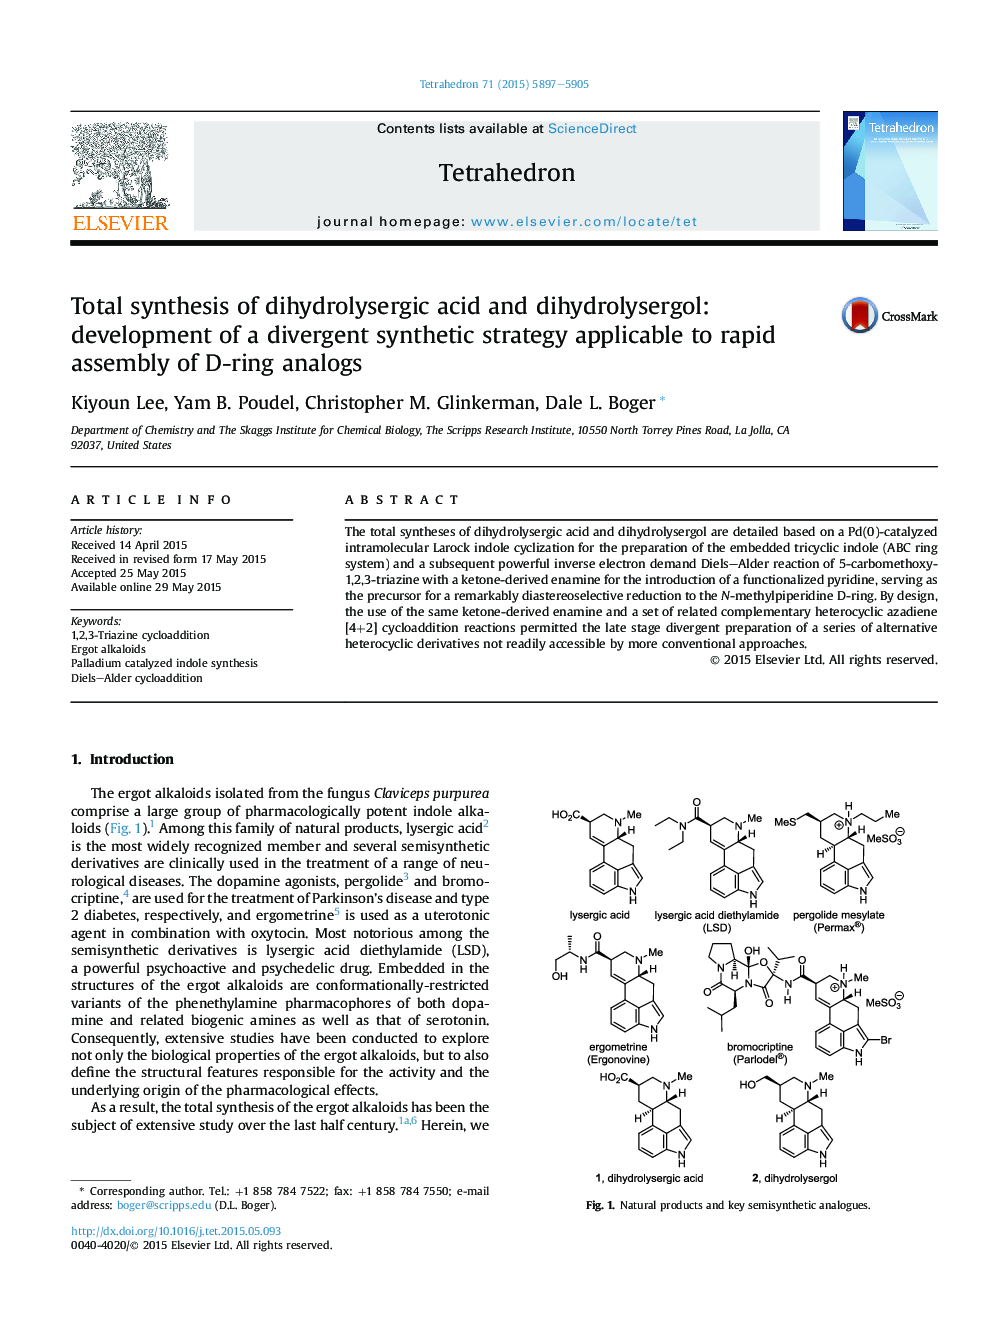 Total synthesis of dihydrolysergic acid and dihydrolysergol: development of a divergent synthetic strategy applicable to rapid assembly of D-ring analogs